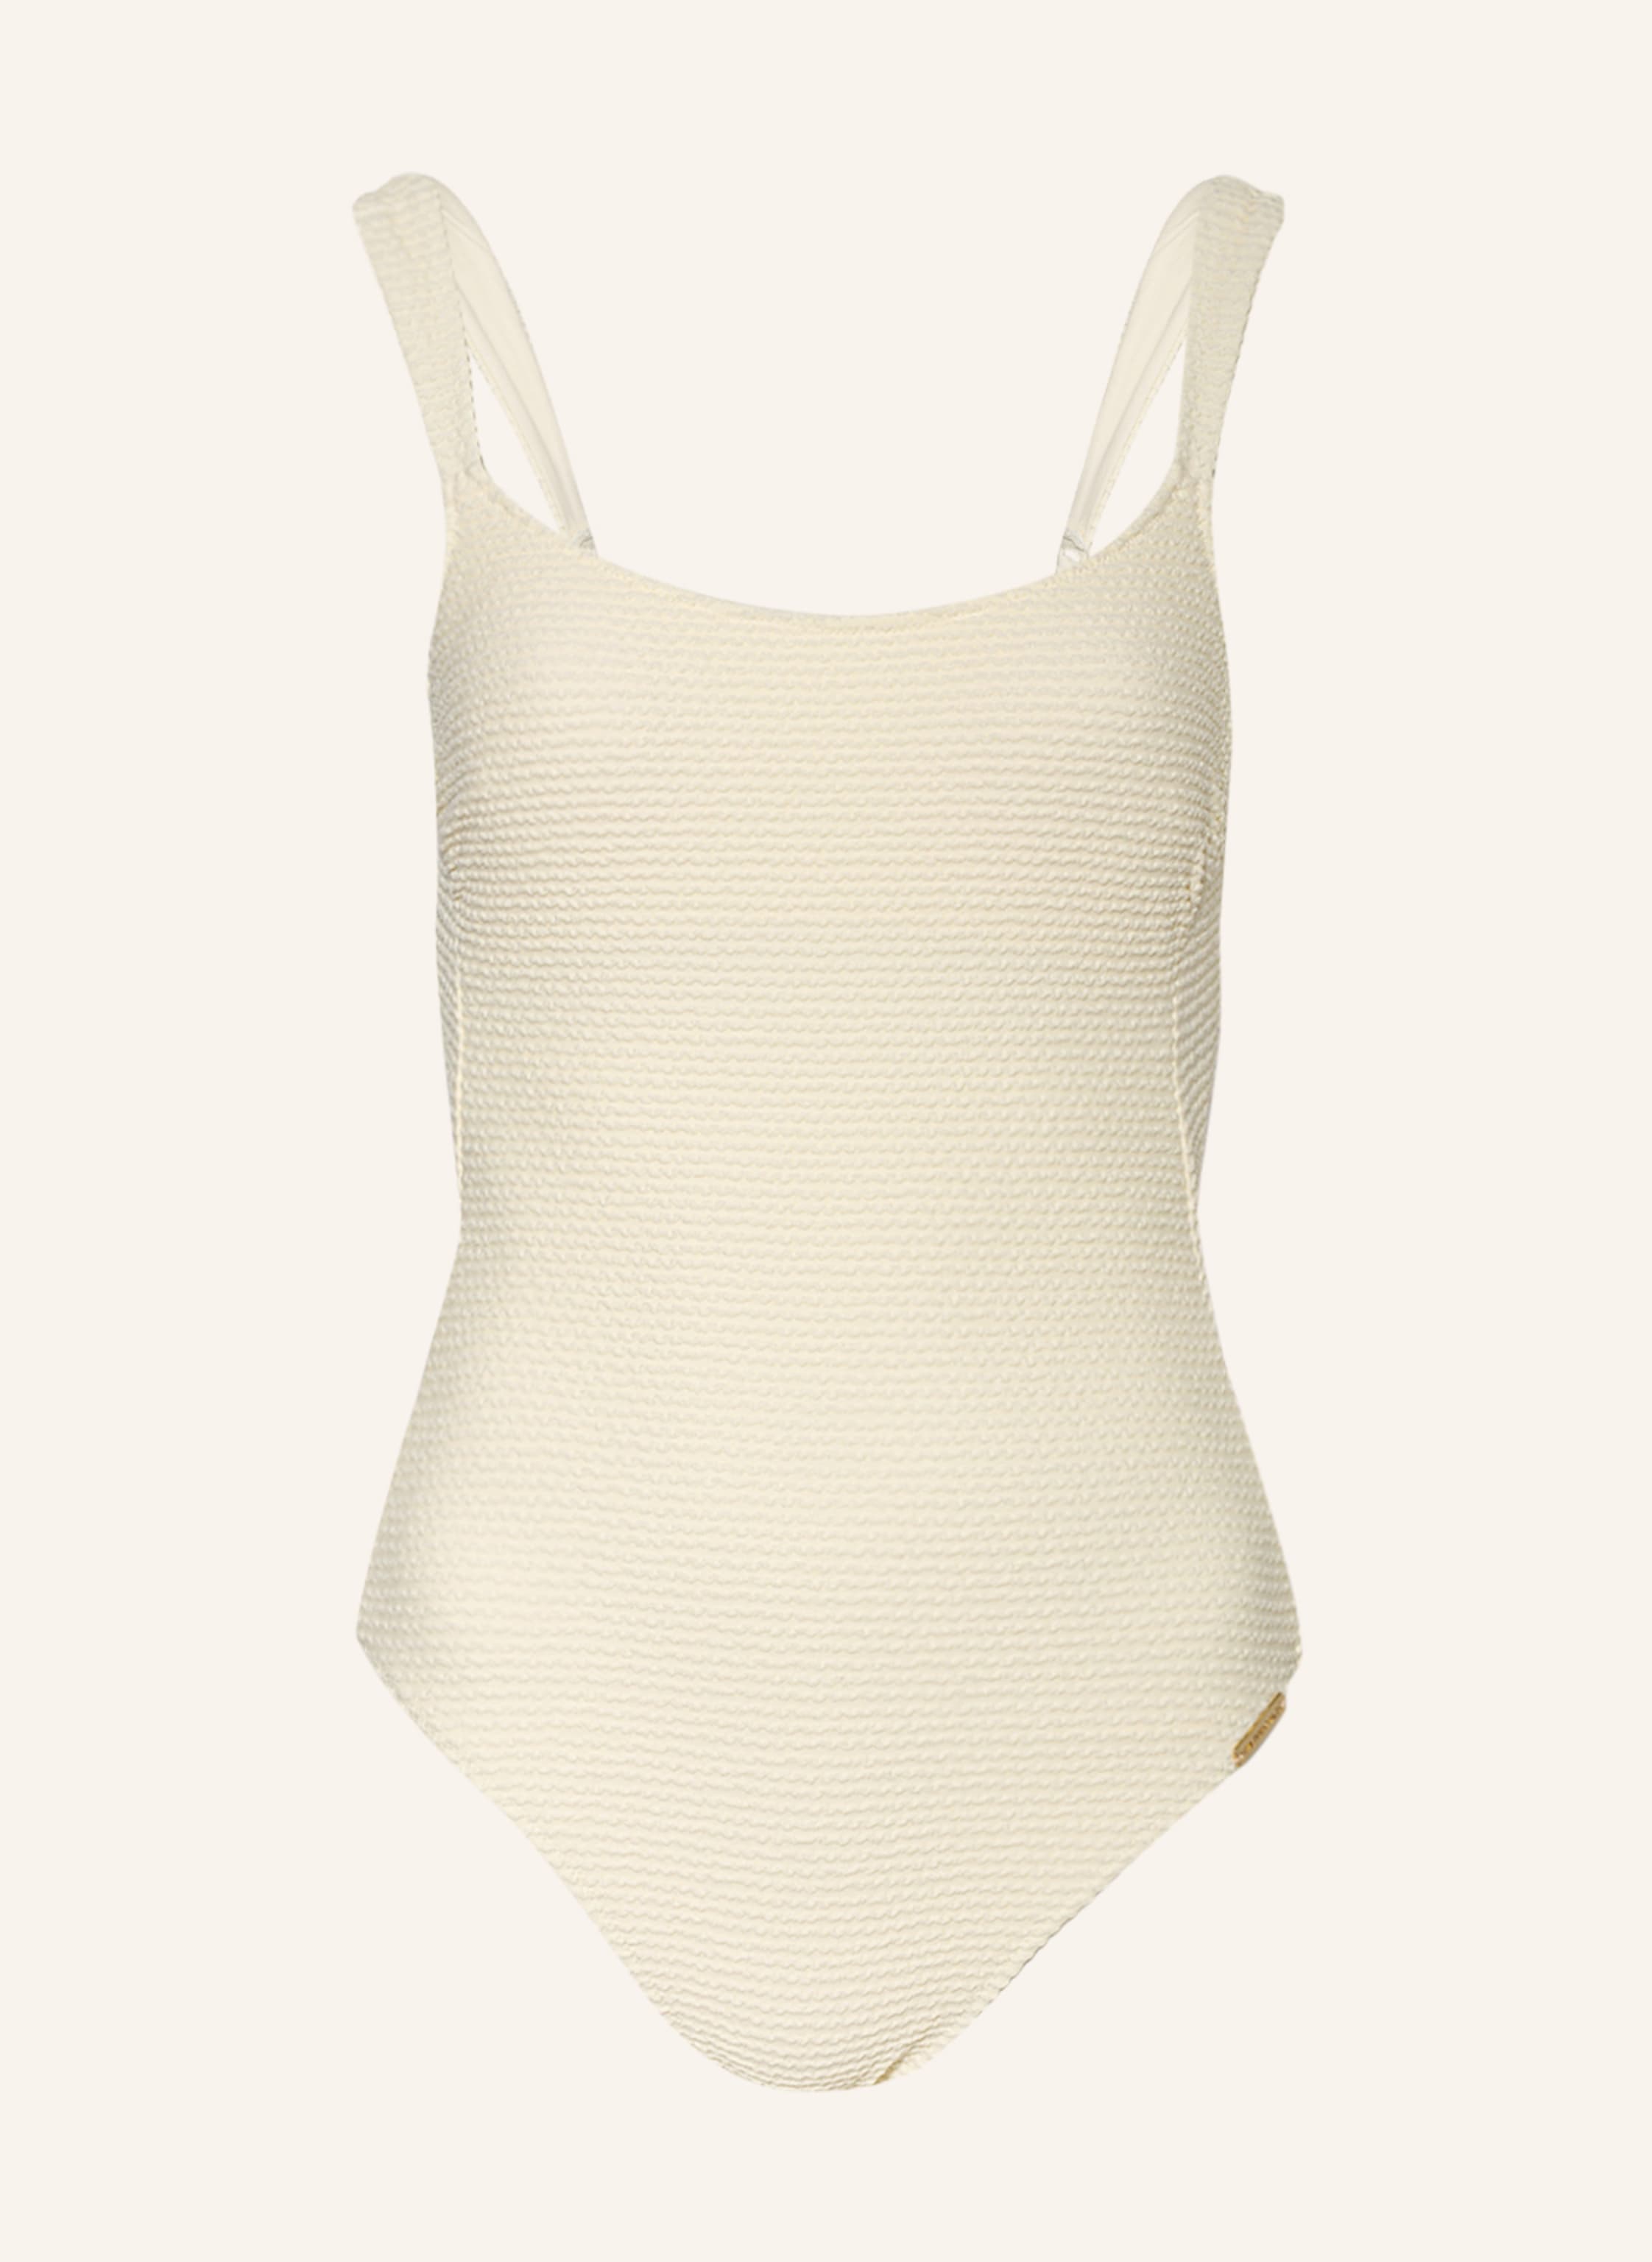 TEXTURED One-piece Swimsuit - Creamy white dots